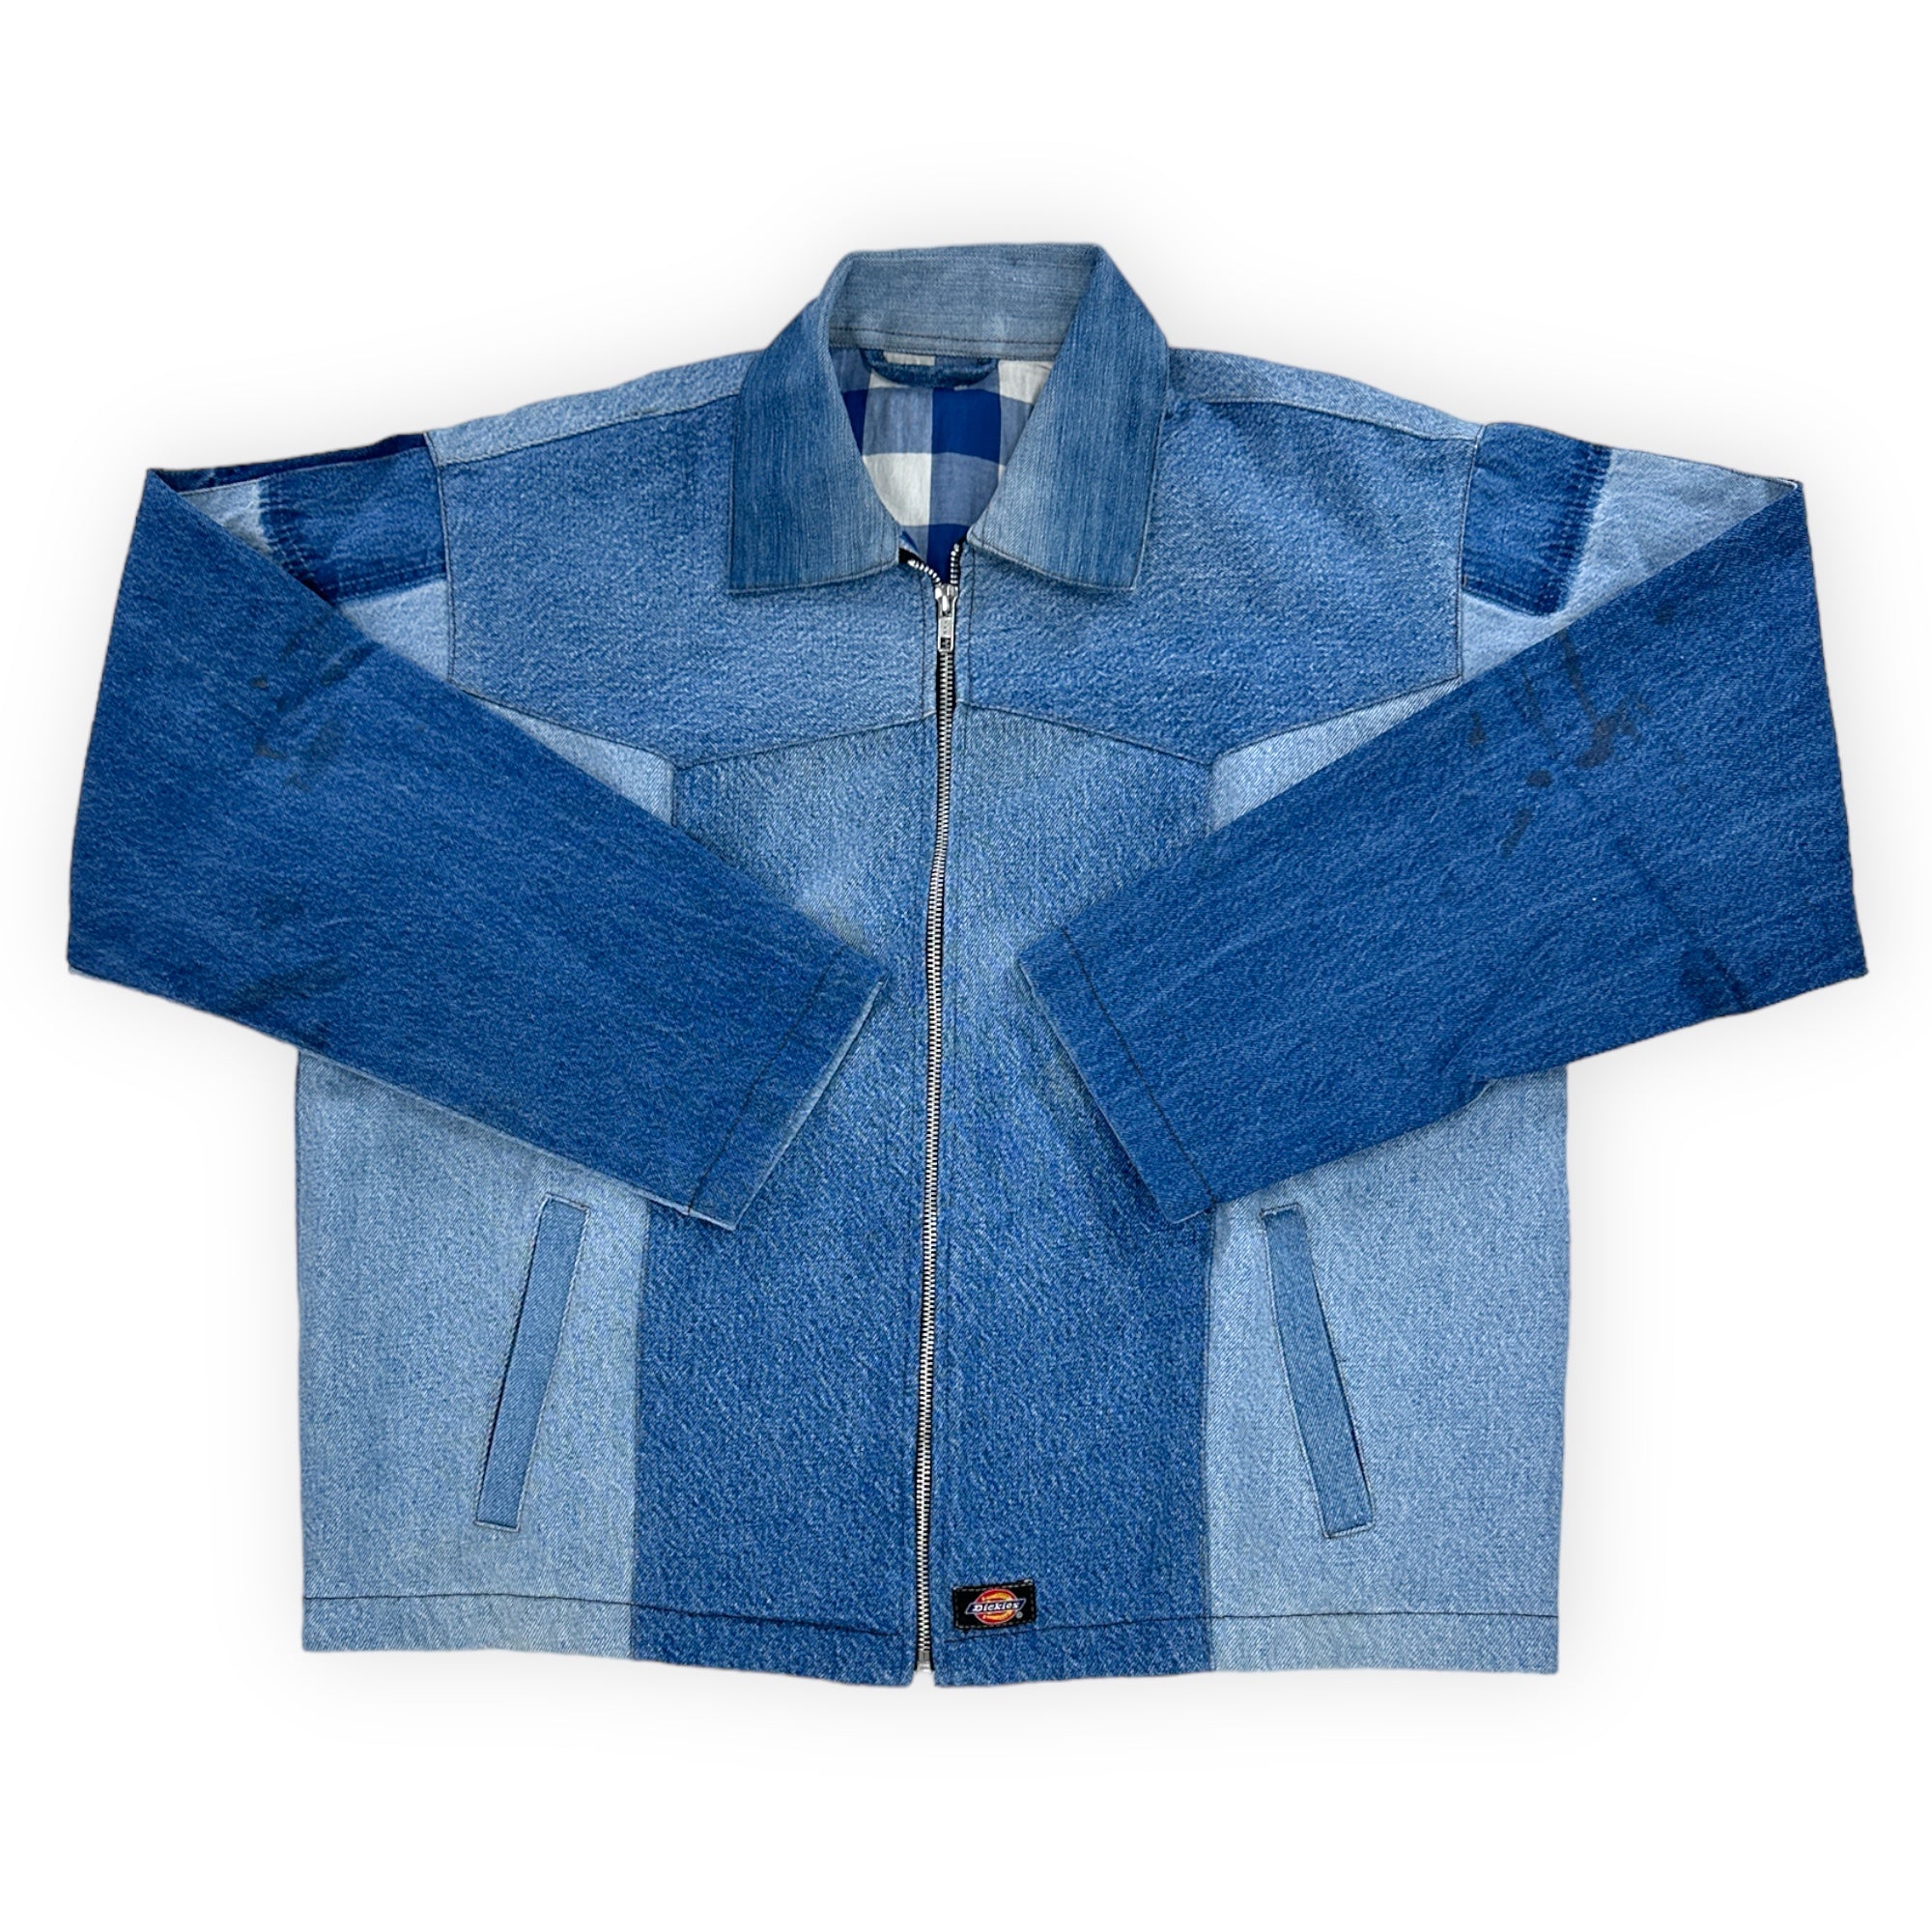 Chore Coat Made From Upcycled Dickies Work Jeans - L/XL